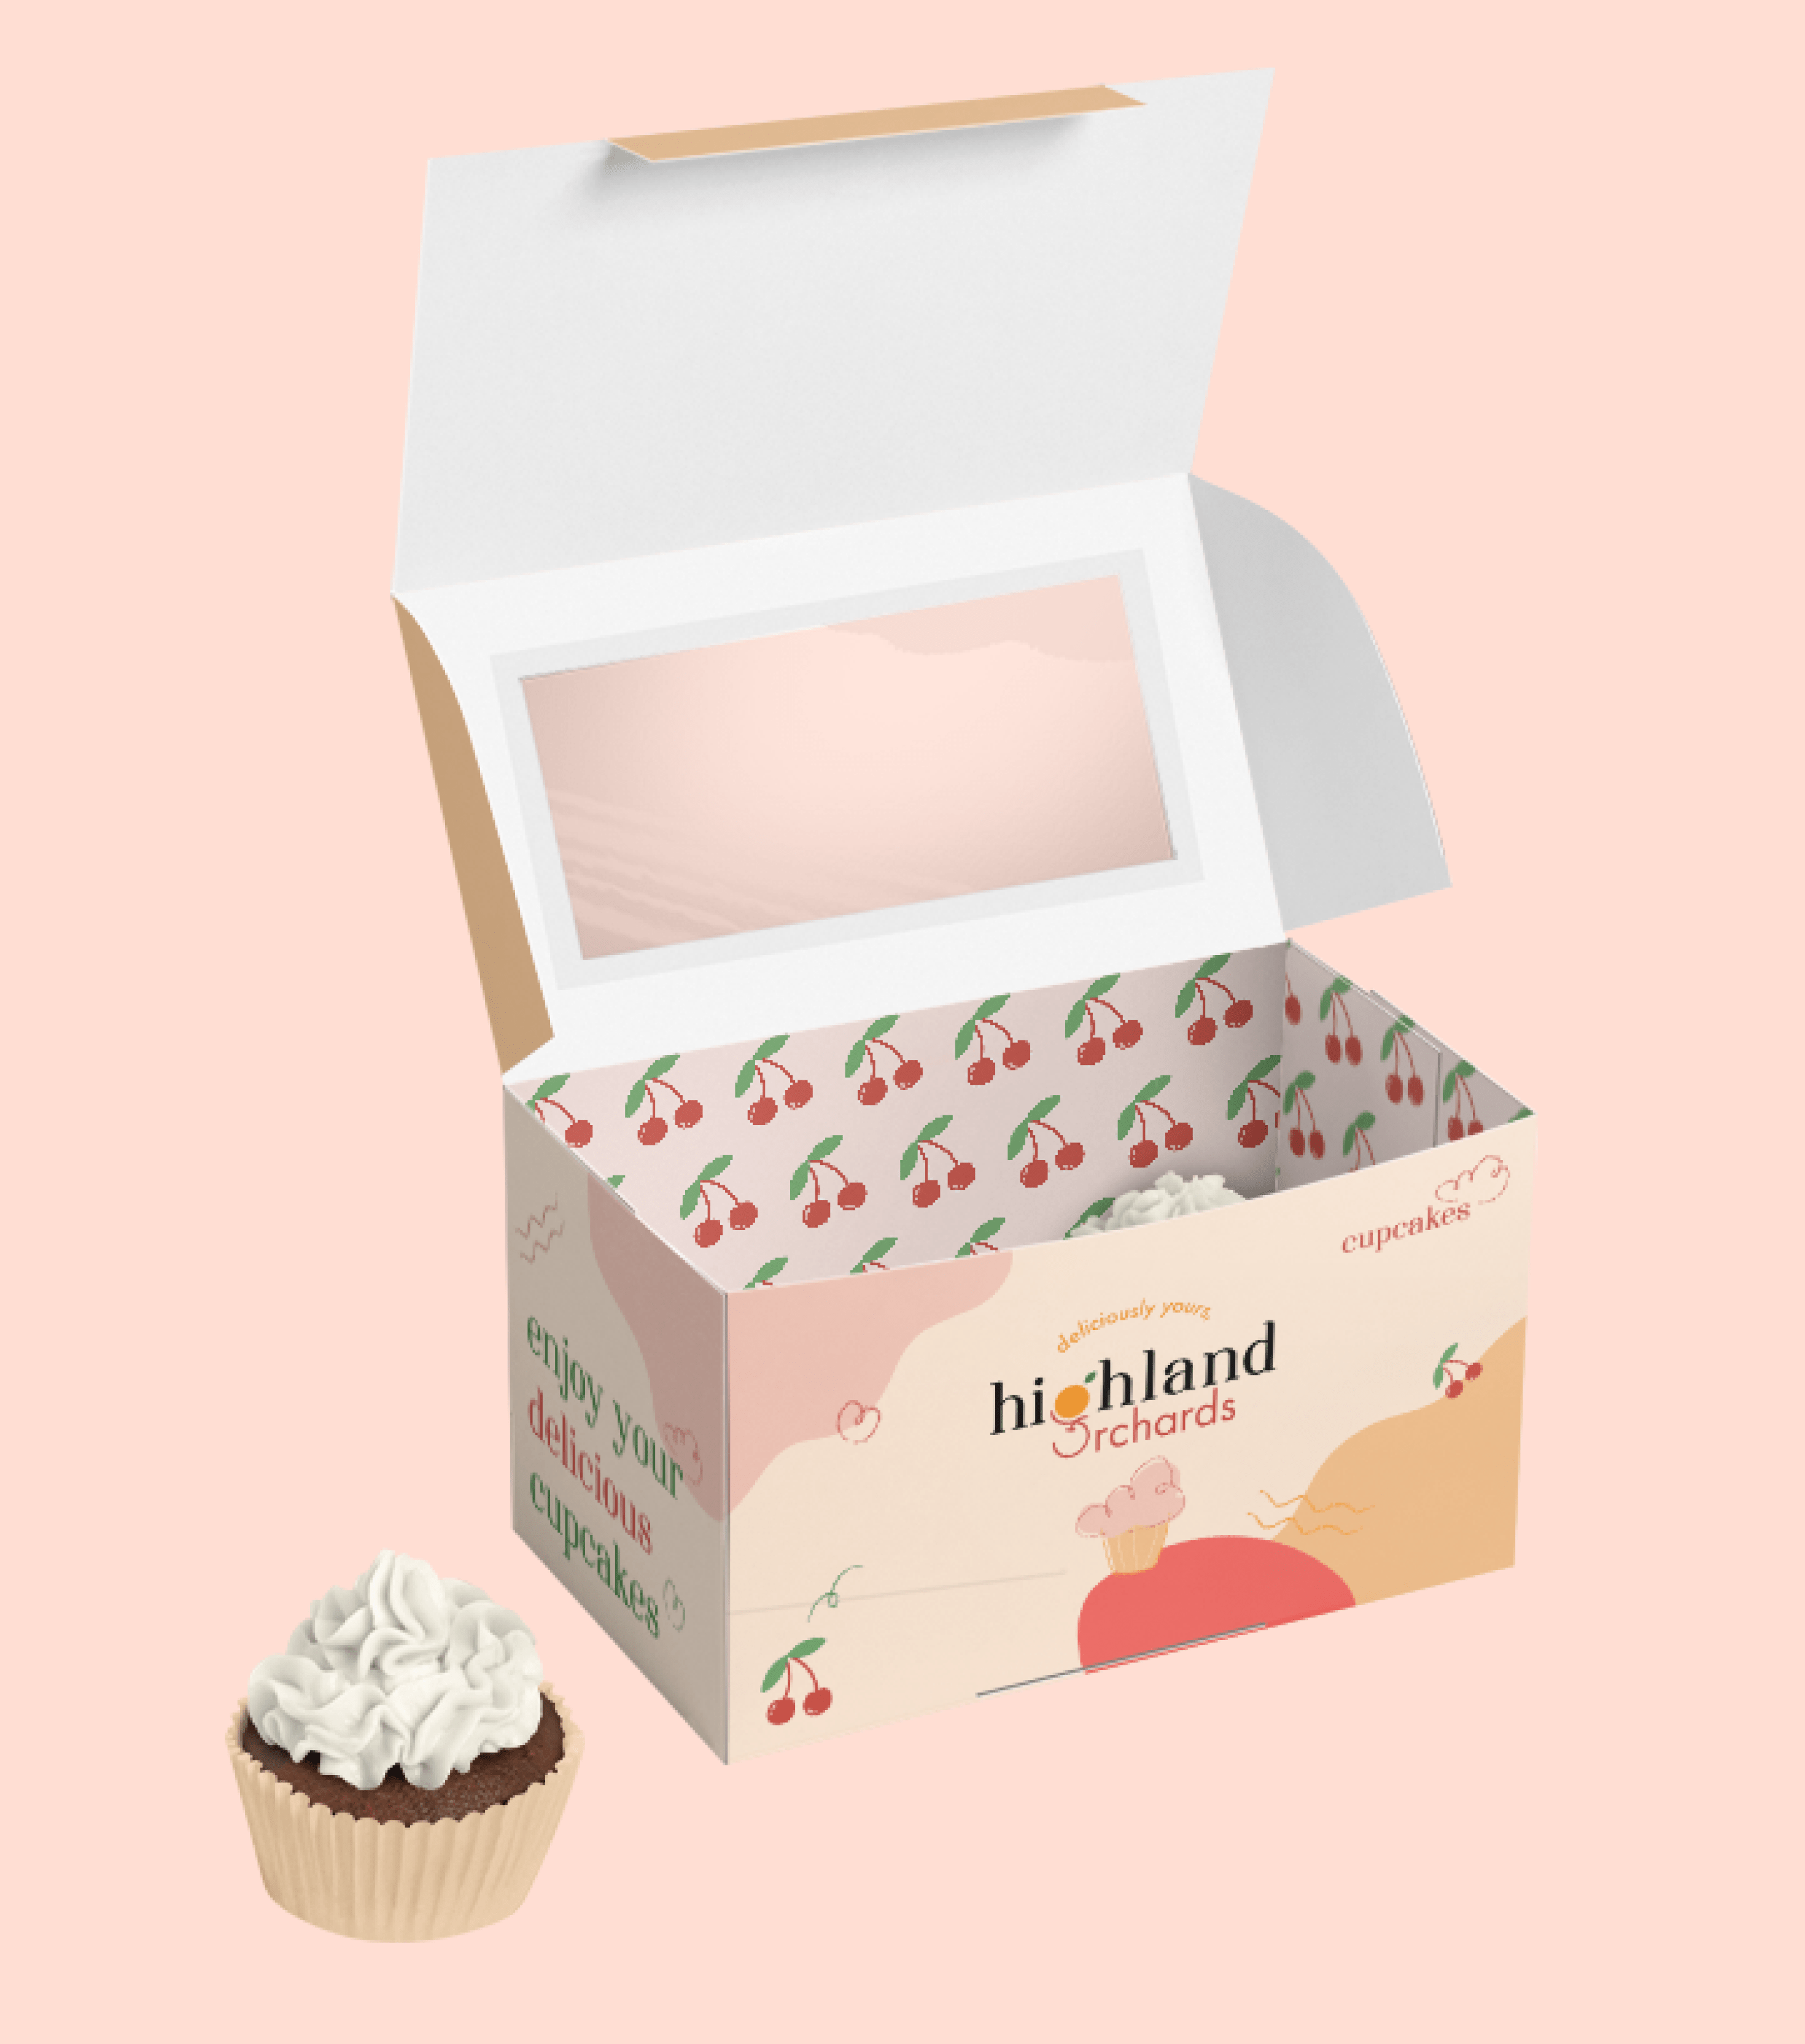 highland orchards rebrand bakery cupcake box package design